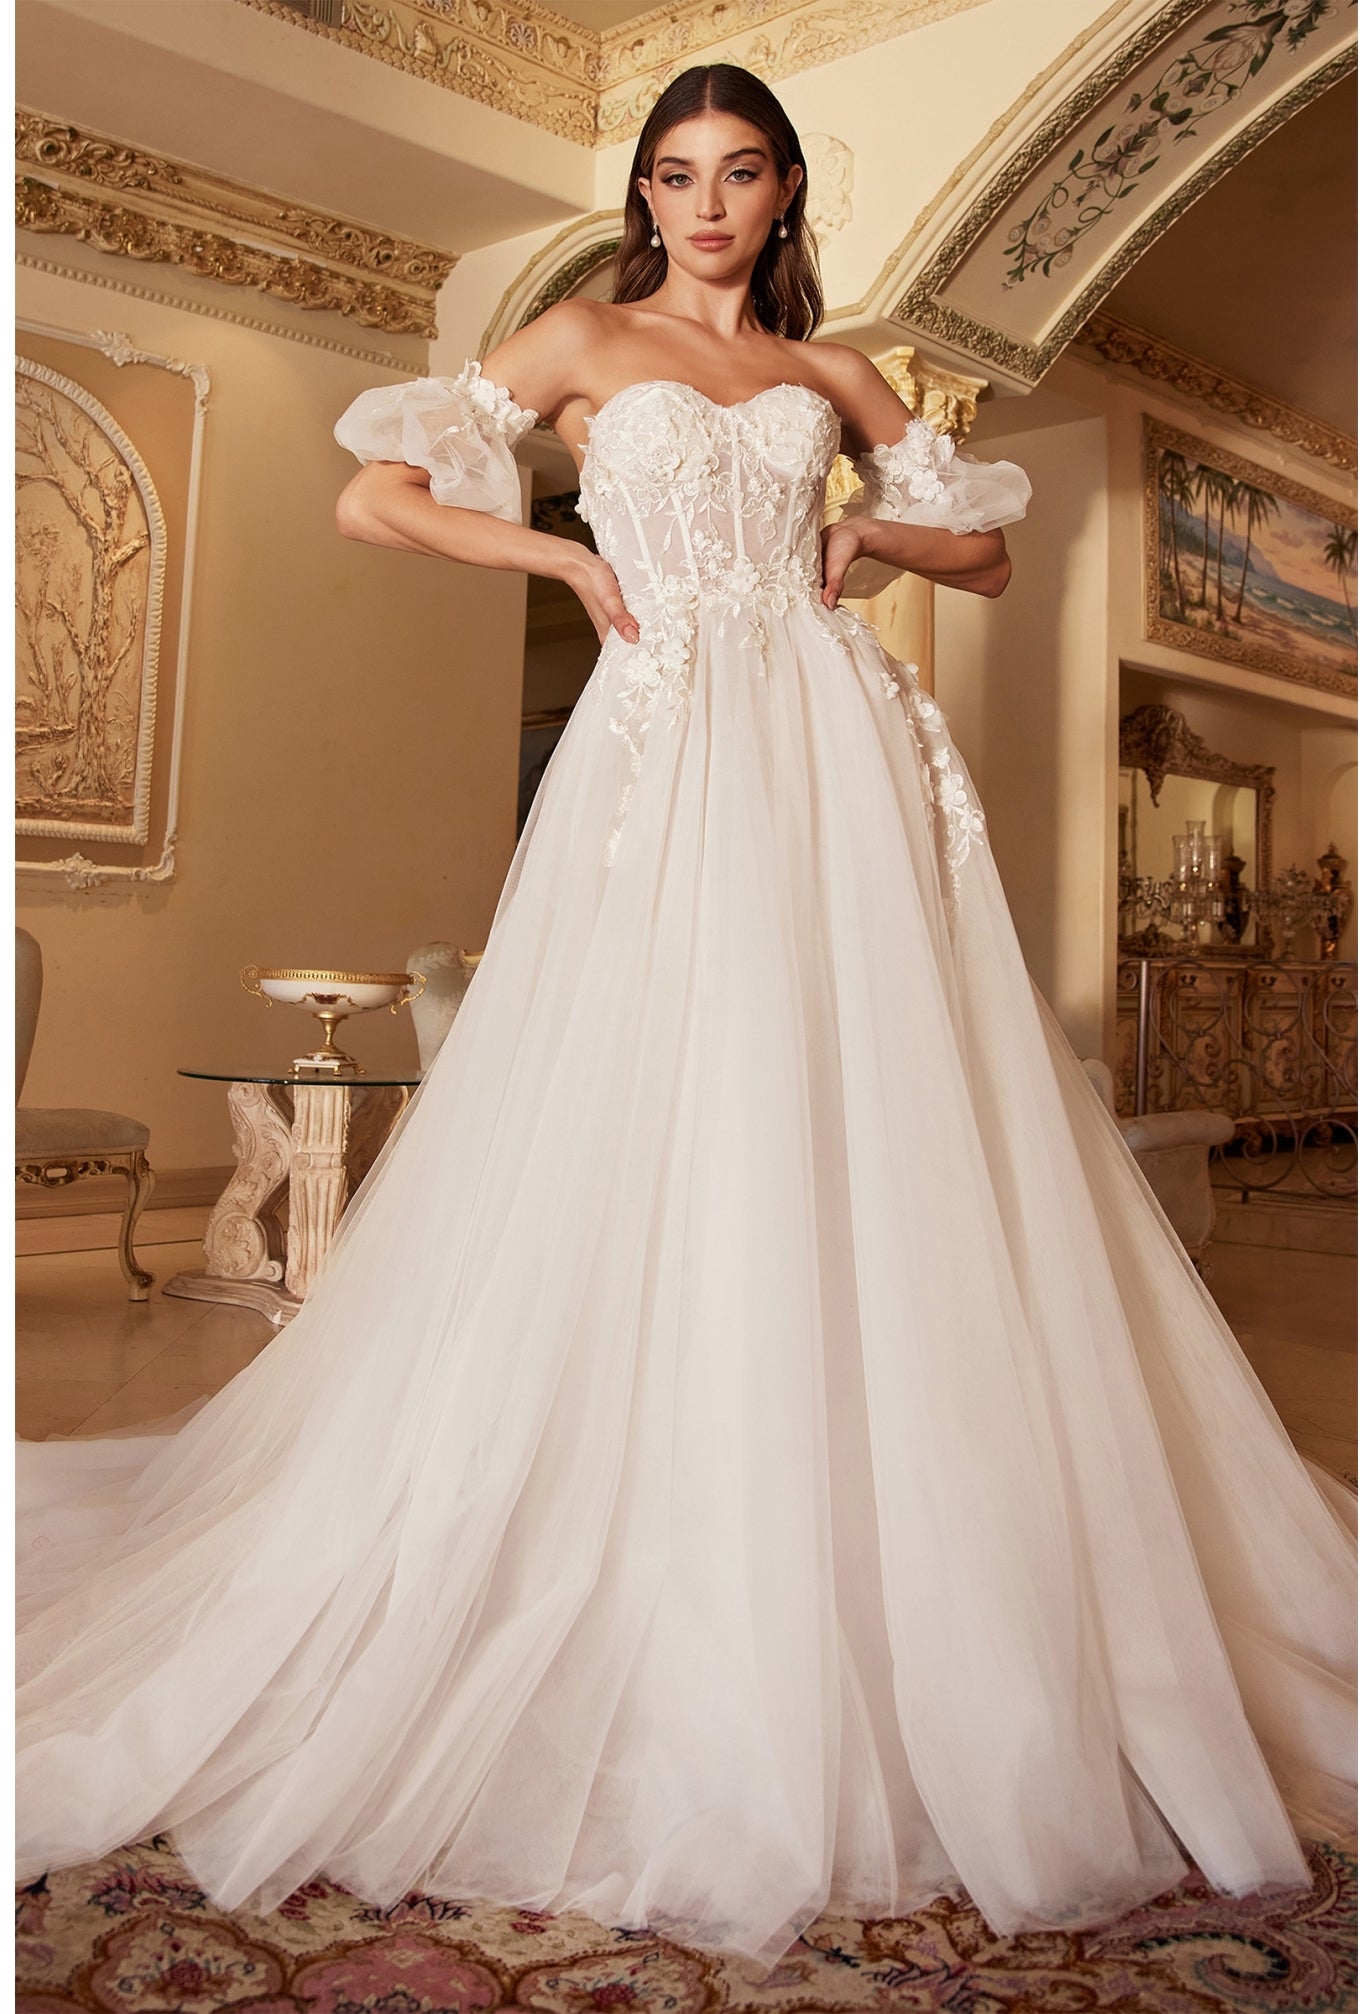 CD TY11 - A-Line Wedding Gown with Sheer Lace Embellished V-Neck Bodic –  Diggz Formals